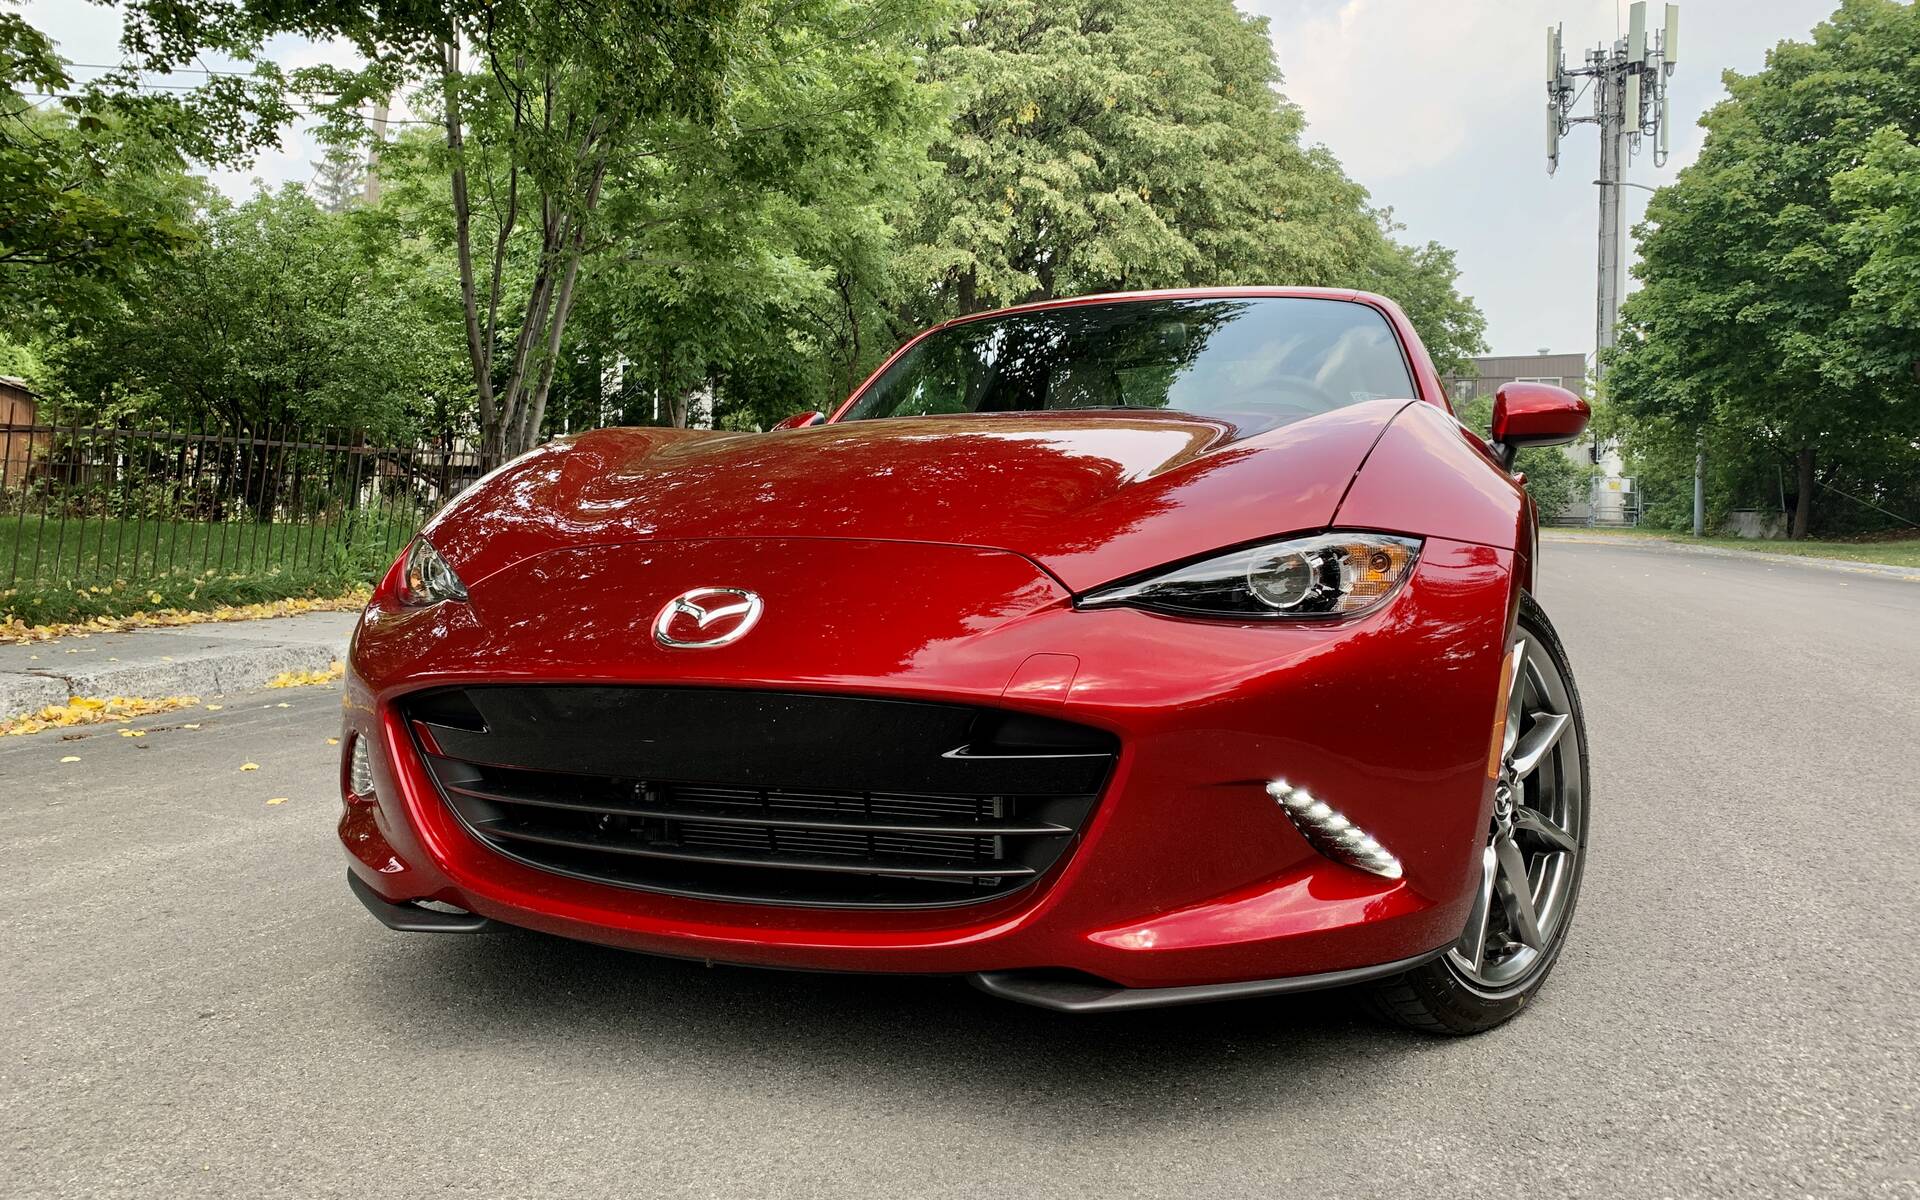 Next-Gen Mazda MX-5 in the Works, Won't Change That Much - The Car Guide